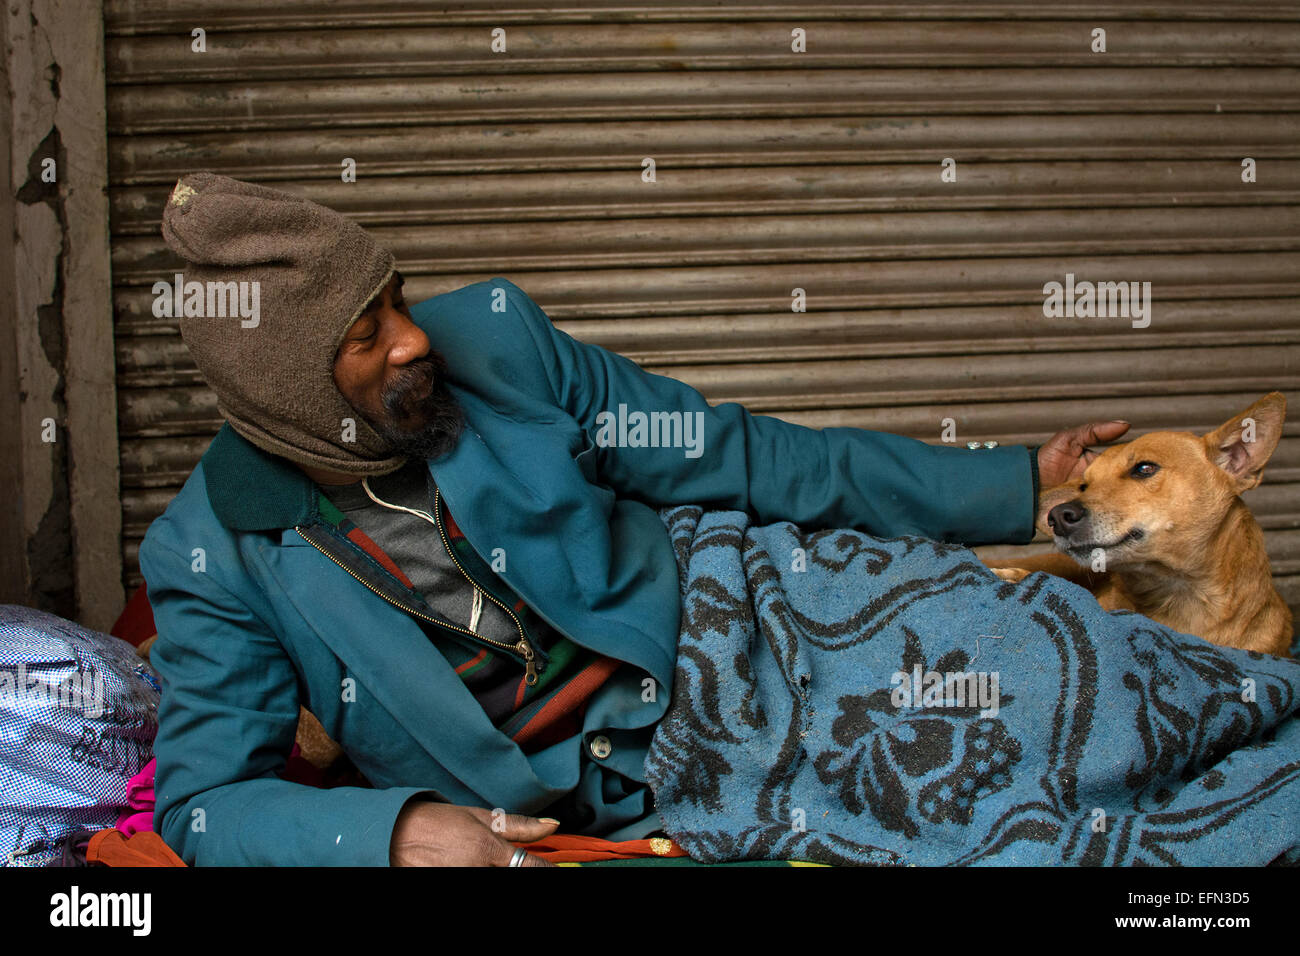 homeless man,stray dog,love,affection,street,India,co-existence,winter,poverty,pavement-dweller,friends,companions,care Stock Photo